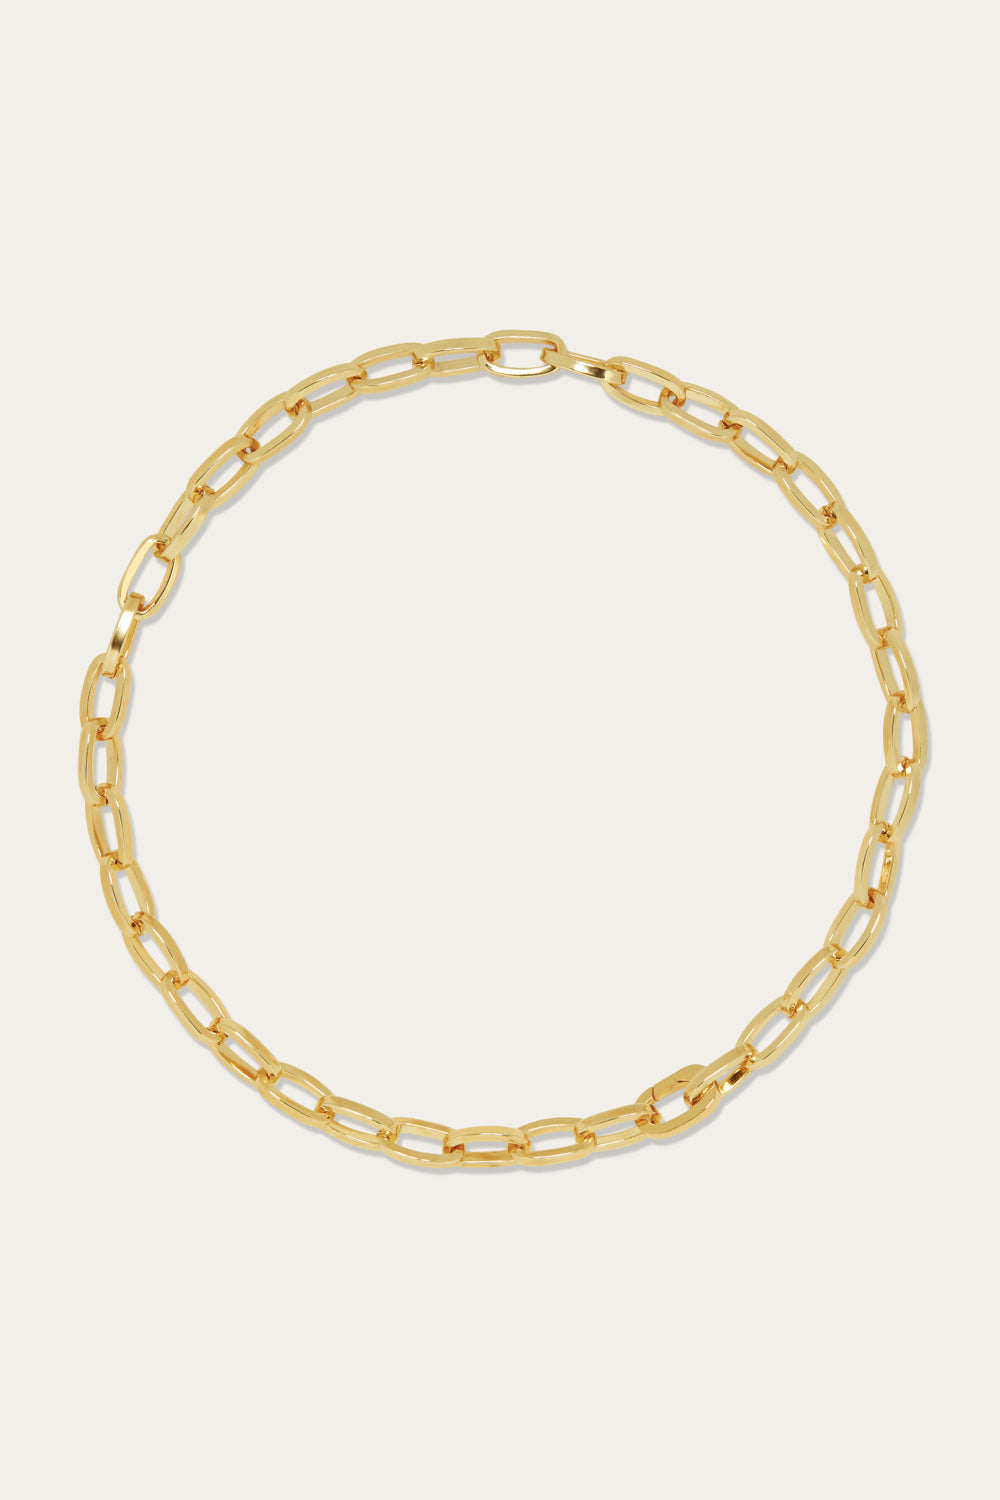 Cara gold plated chain necklace